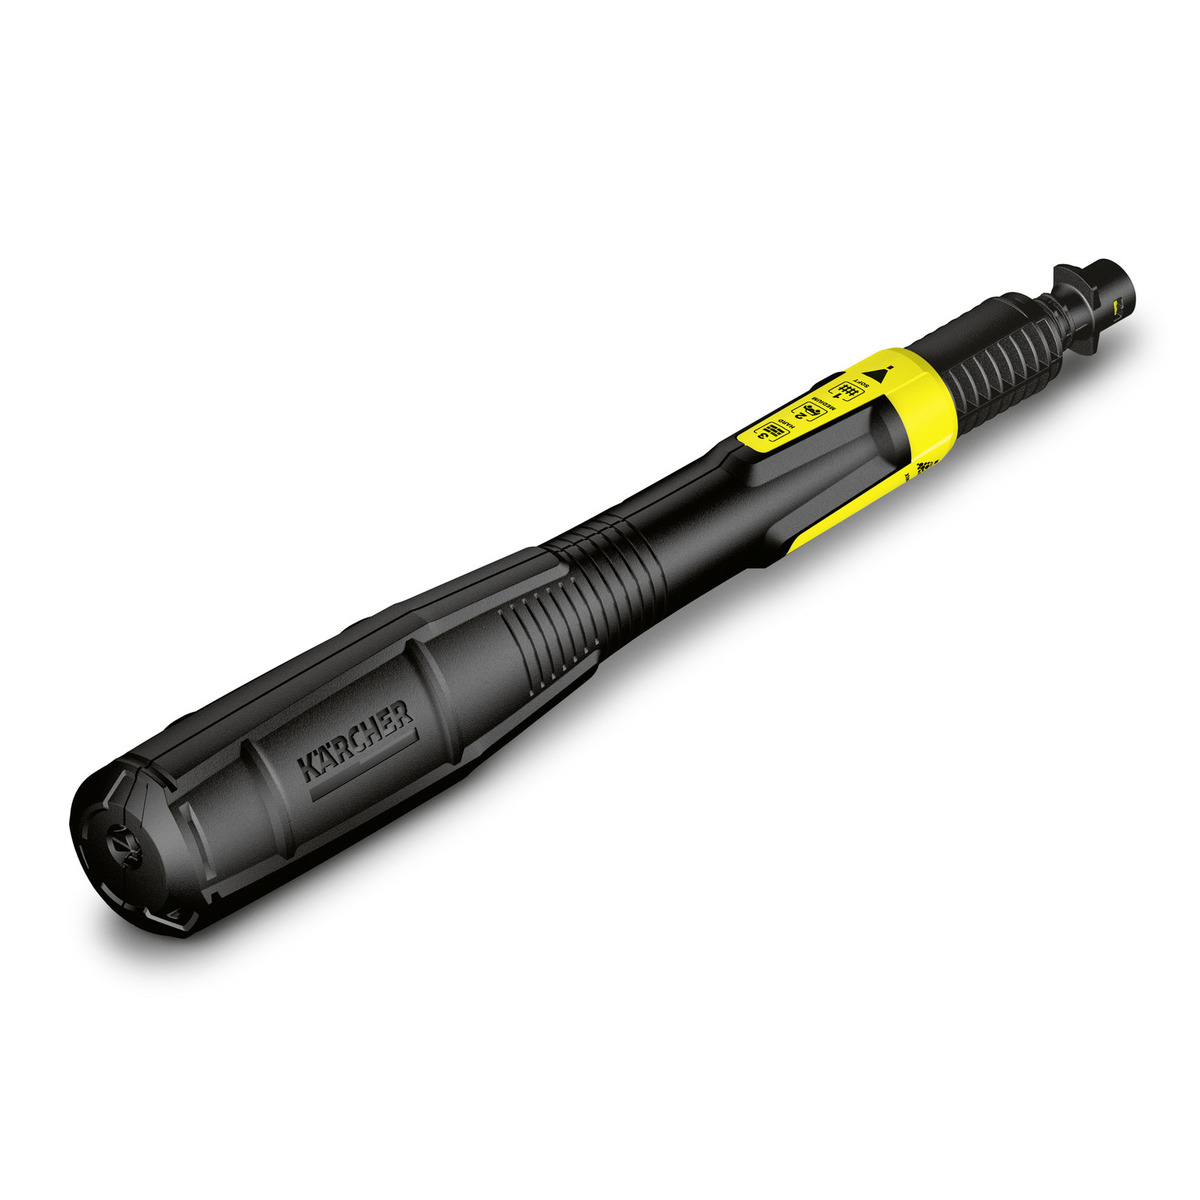 A black tactical pen with a yellow grip band, labeled "MJ145 Multijet Lance," featuring a glass breaker tip, clip, and textured grip, isolated on a white background.